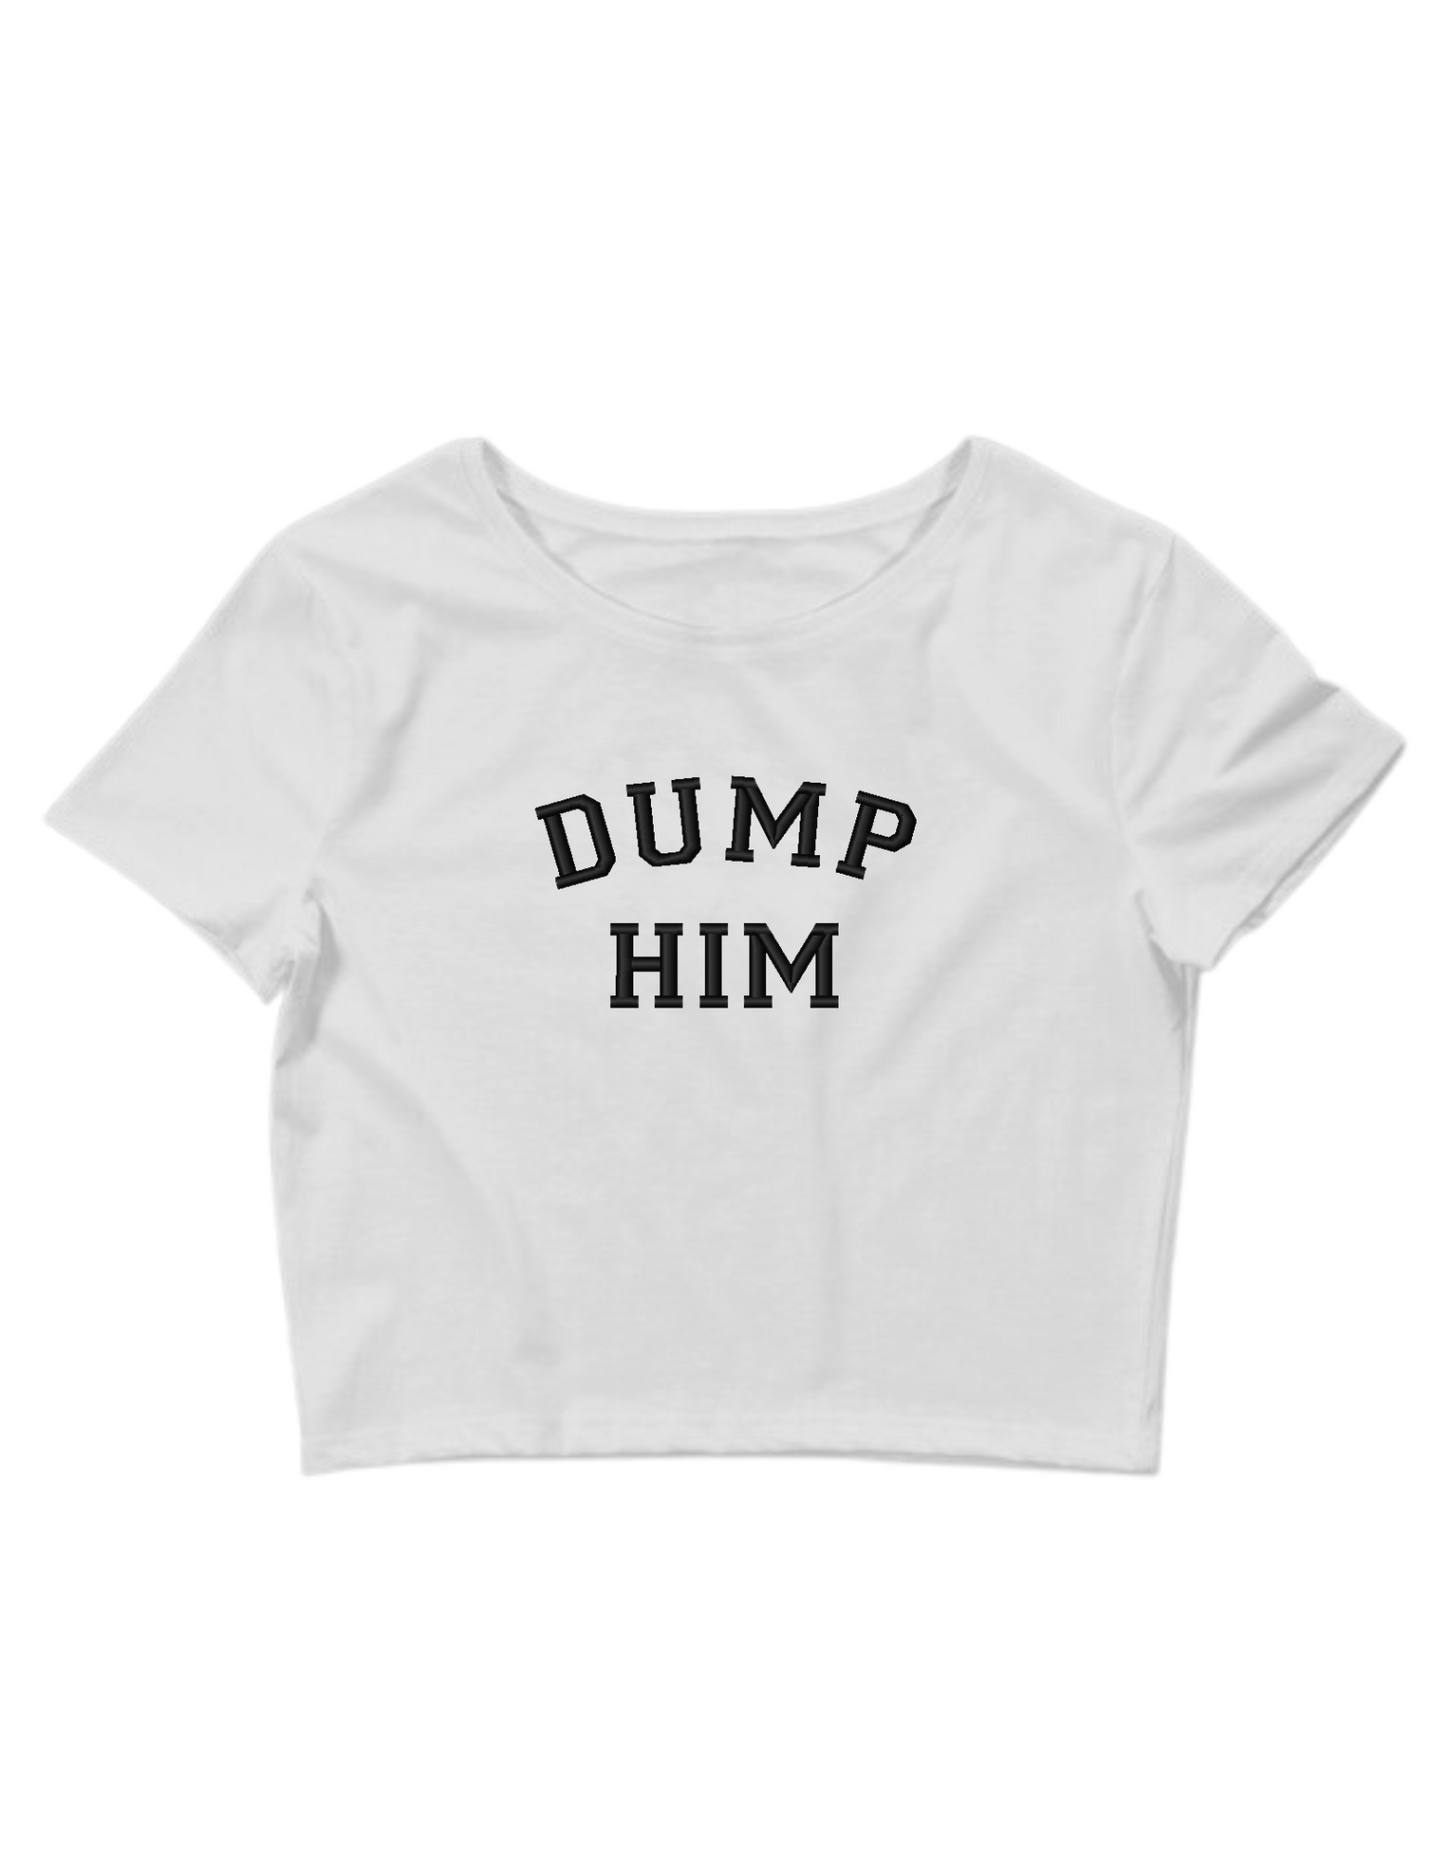 Embroidered 'Dump Him' Cropped, Short Sleeve, Adult Female, Baby Tee